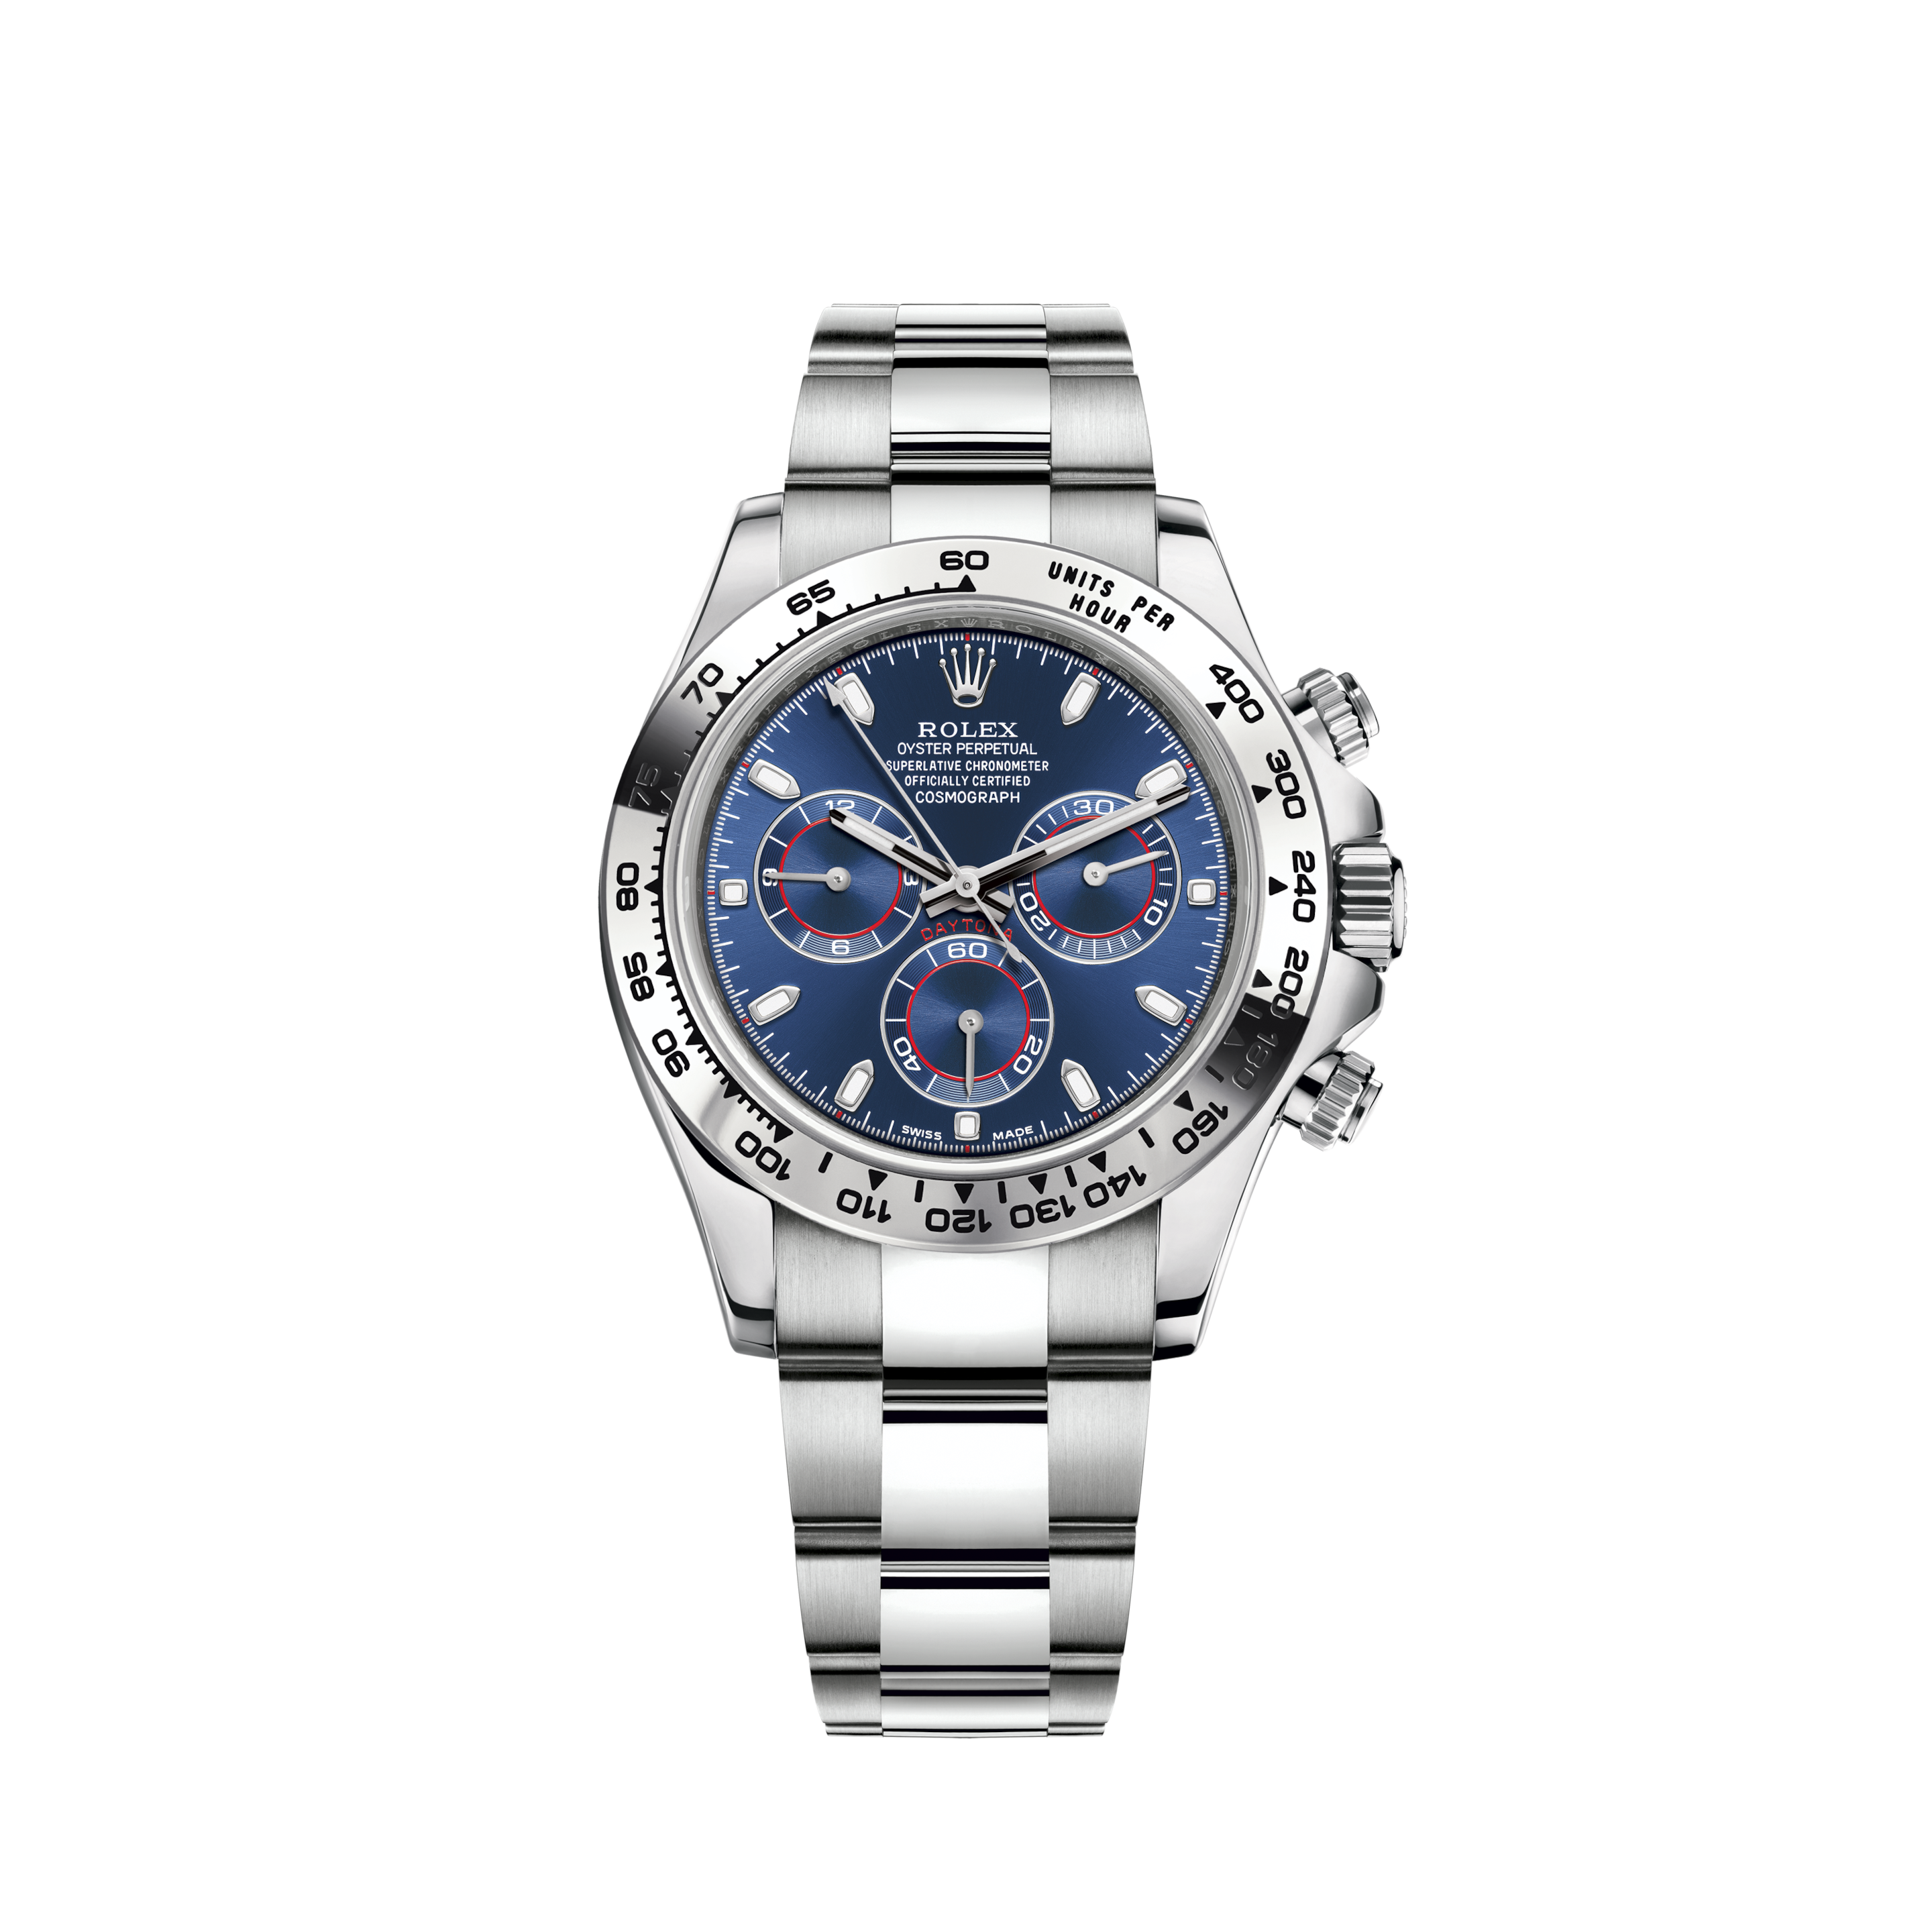 https://www.401kwatches.com